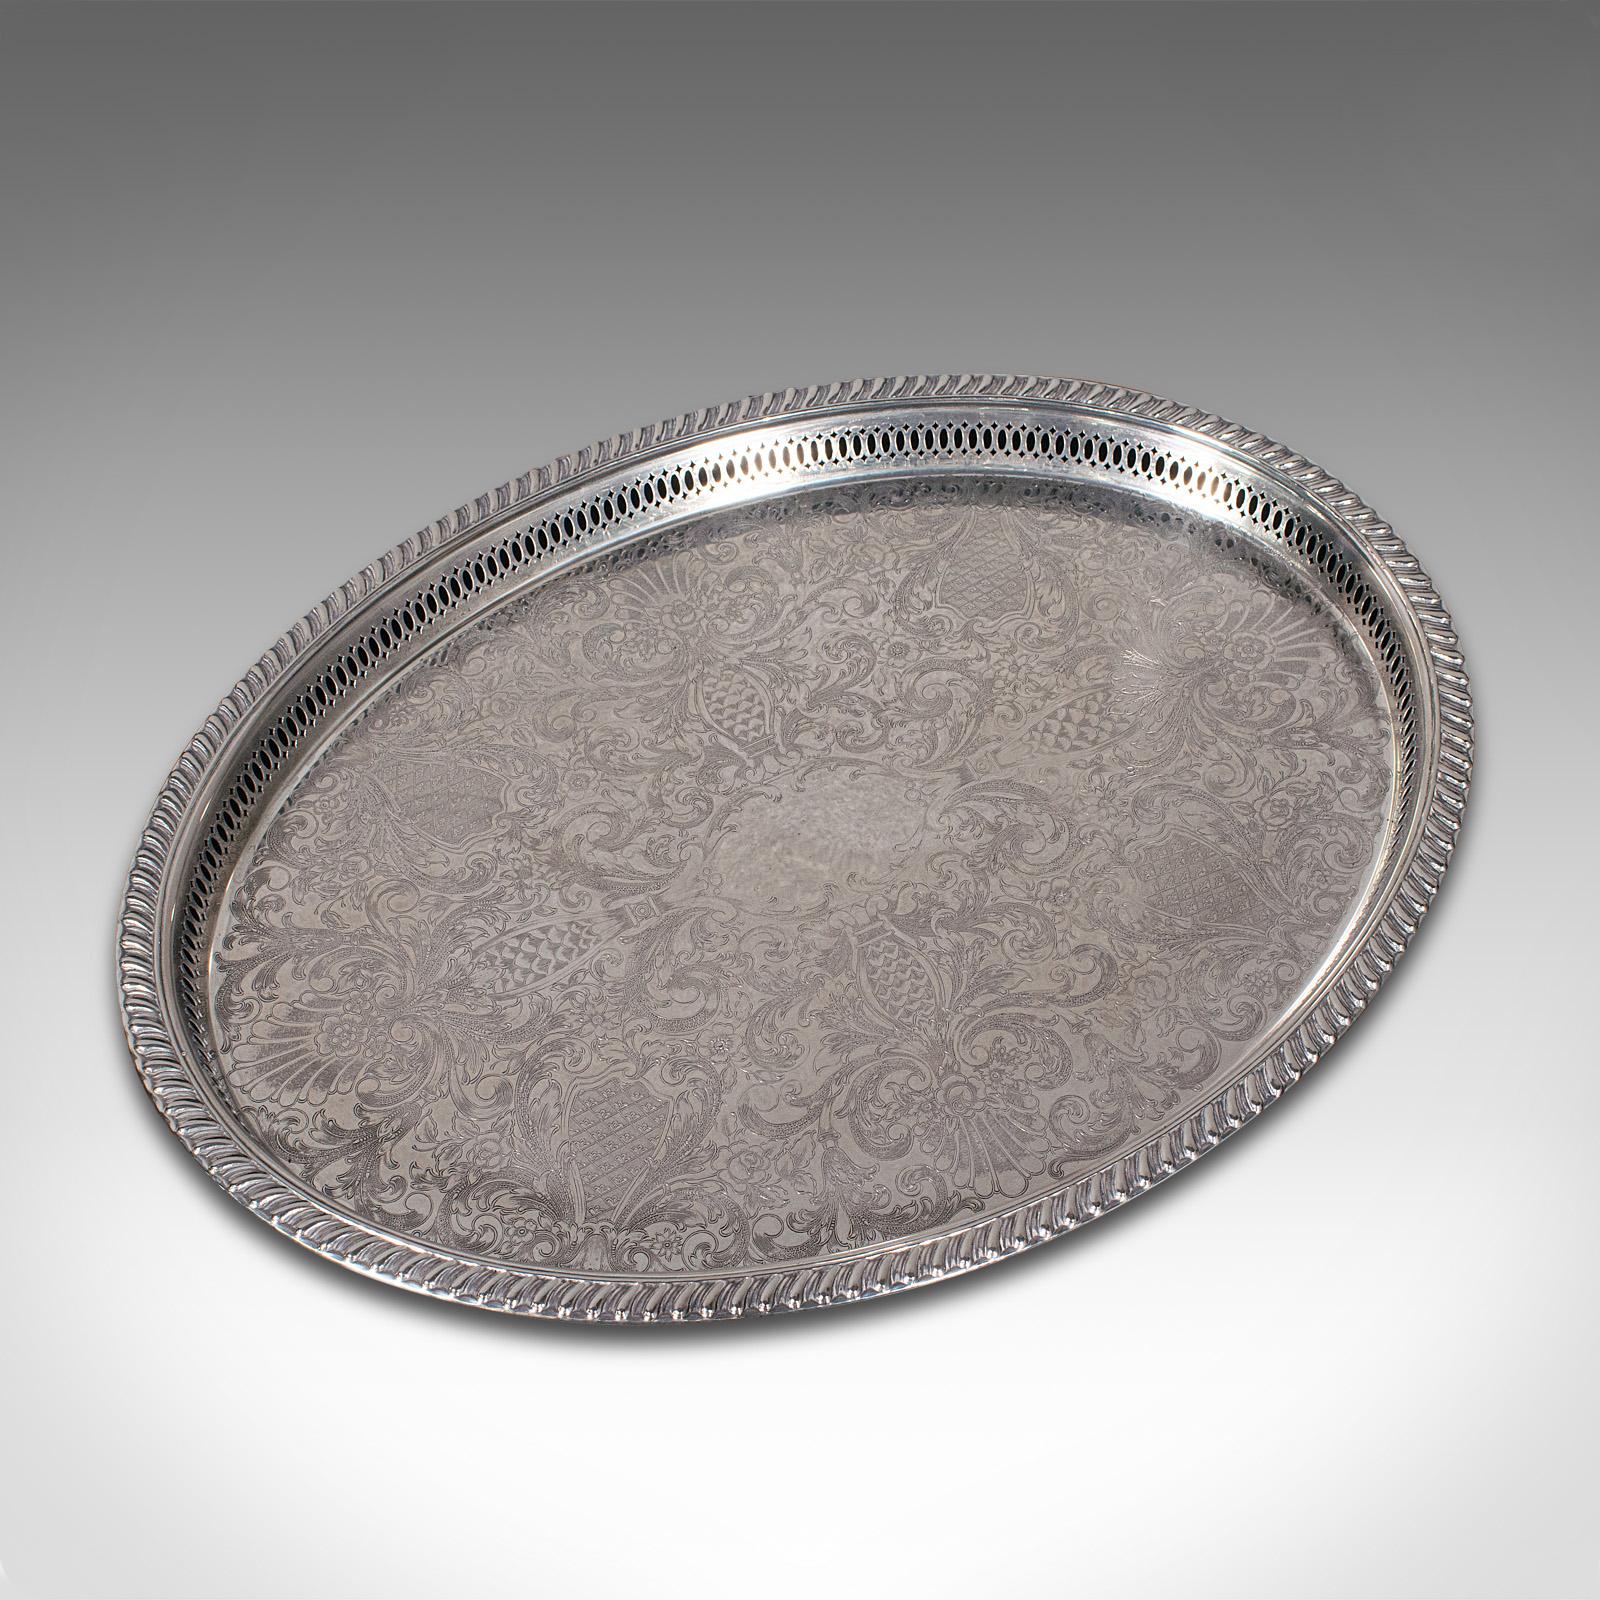 British Vintage Oval Serving Tray, English Silver Plate, Afternoon Tea, Decorative, 1950 For Sale